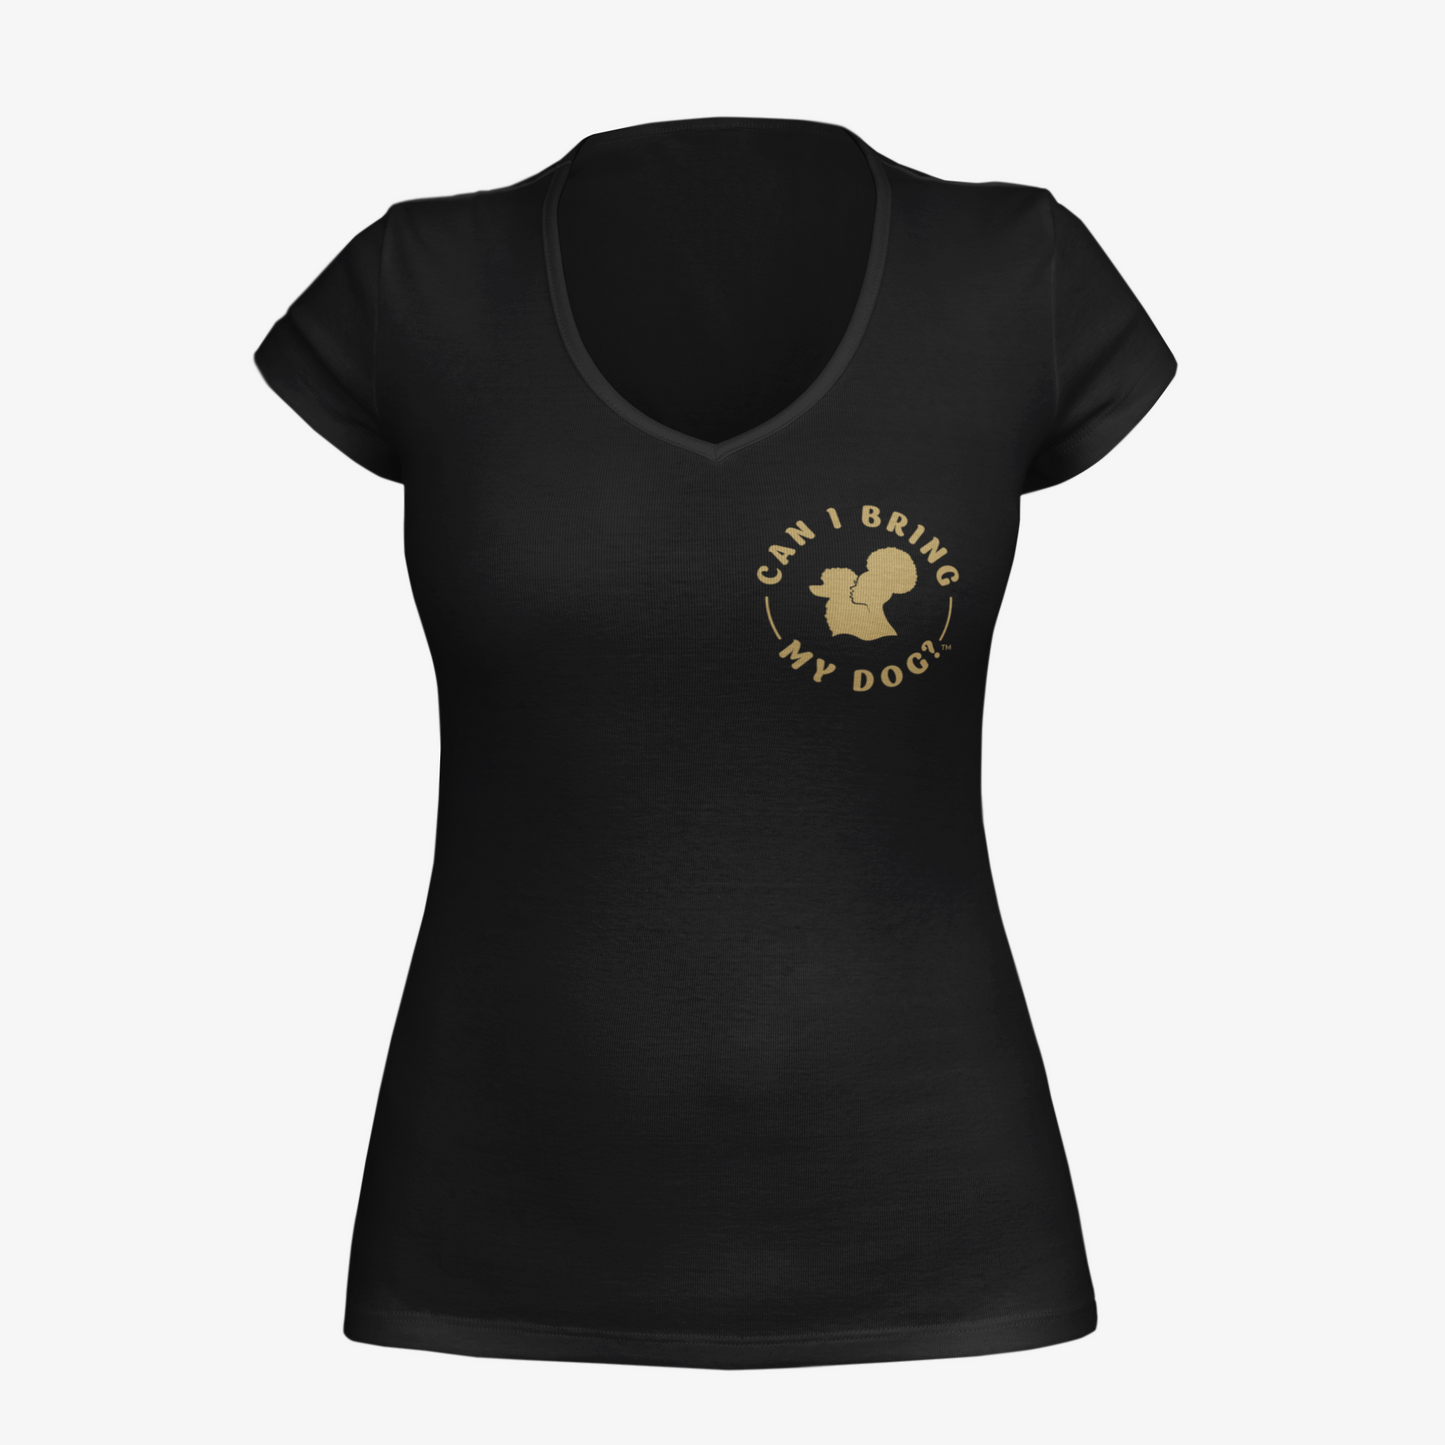 "Can I Bring My Dog?" - Black Woman Silhouette - Deep V-Neck Tee